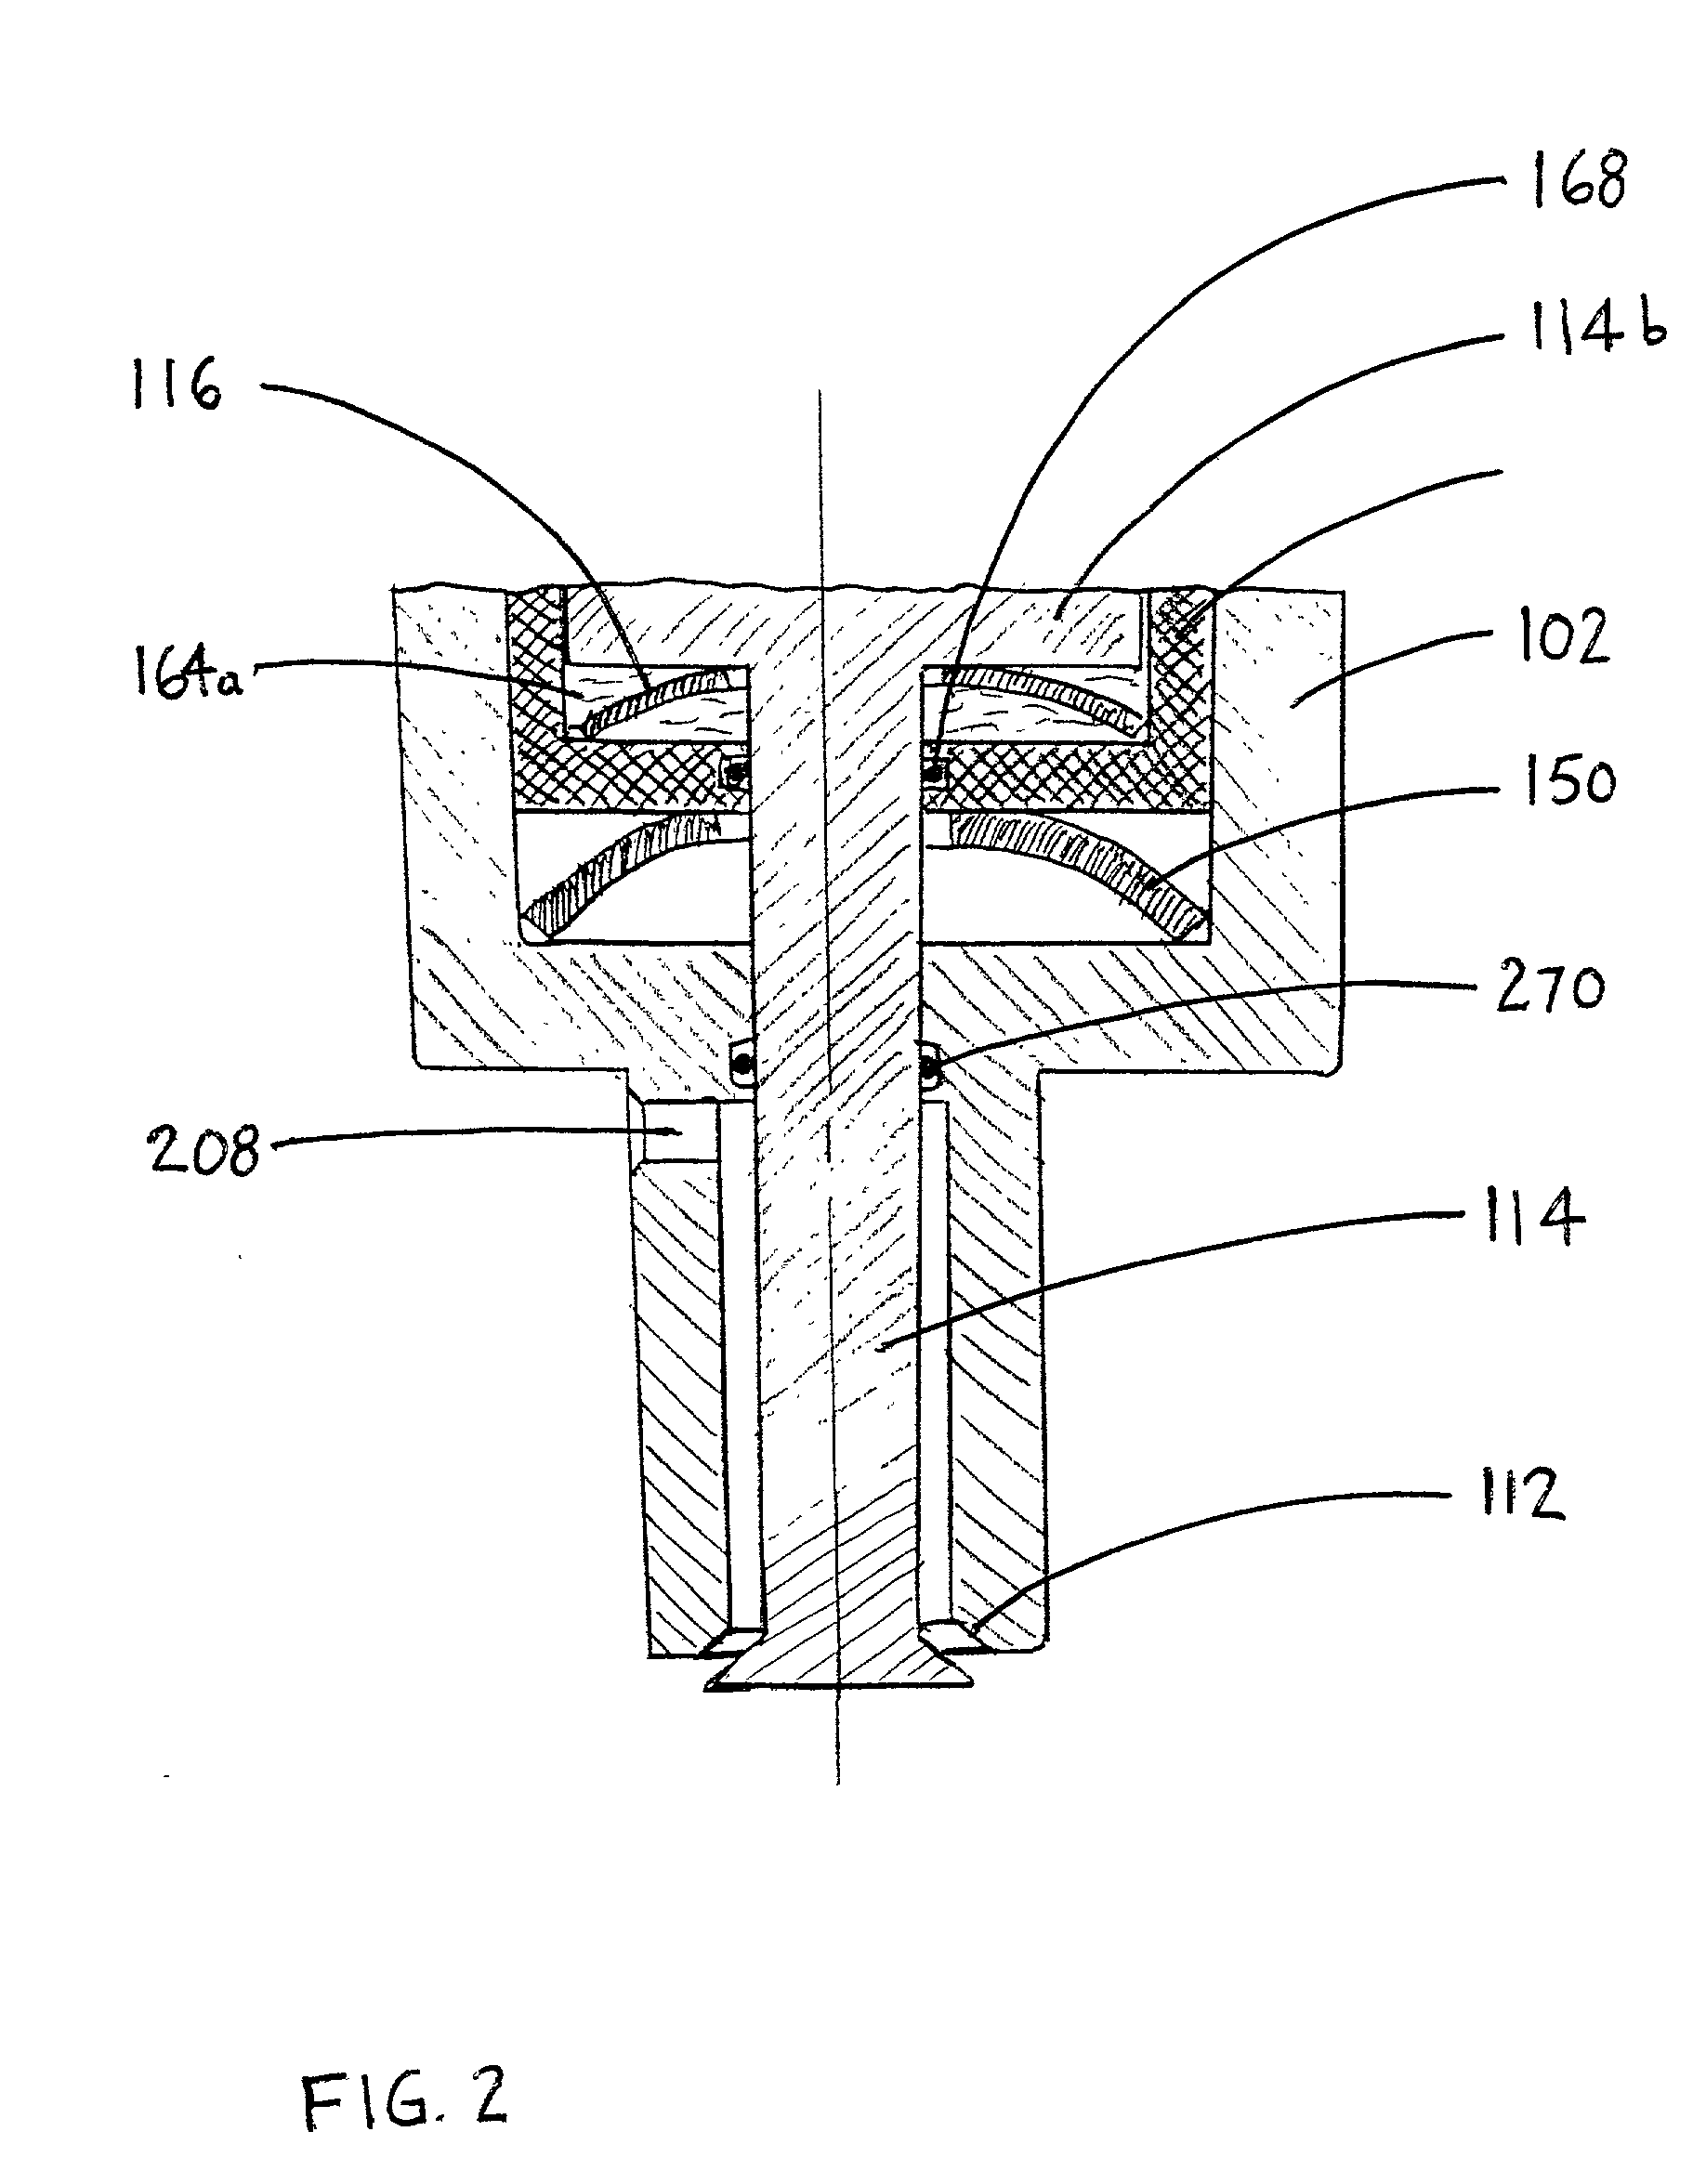 Directly actuated injection valve